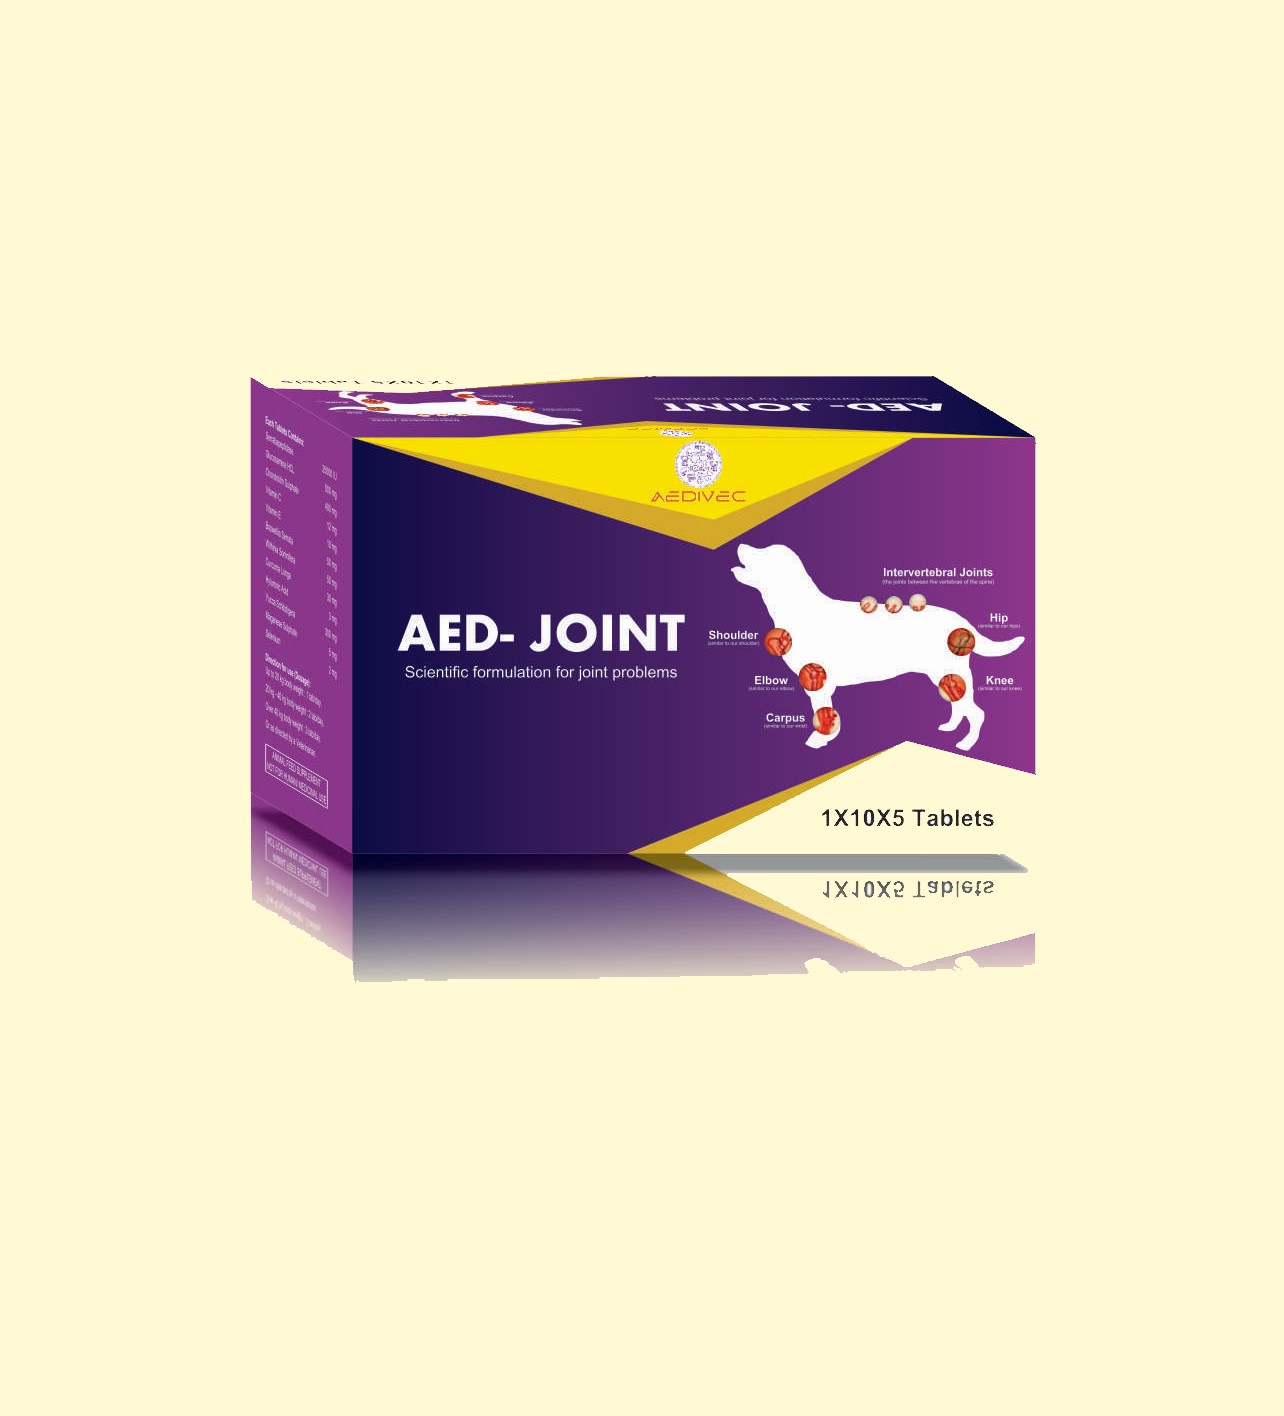 AED-JOINT